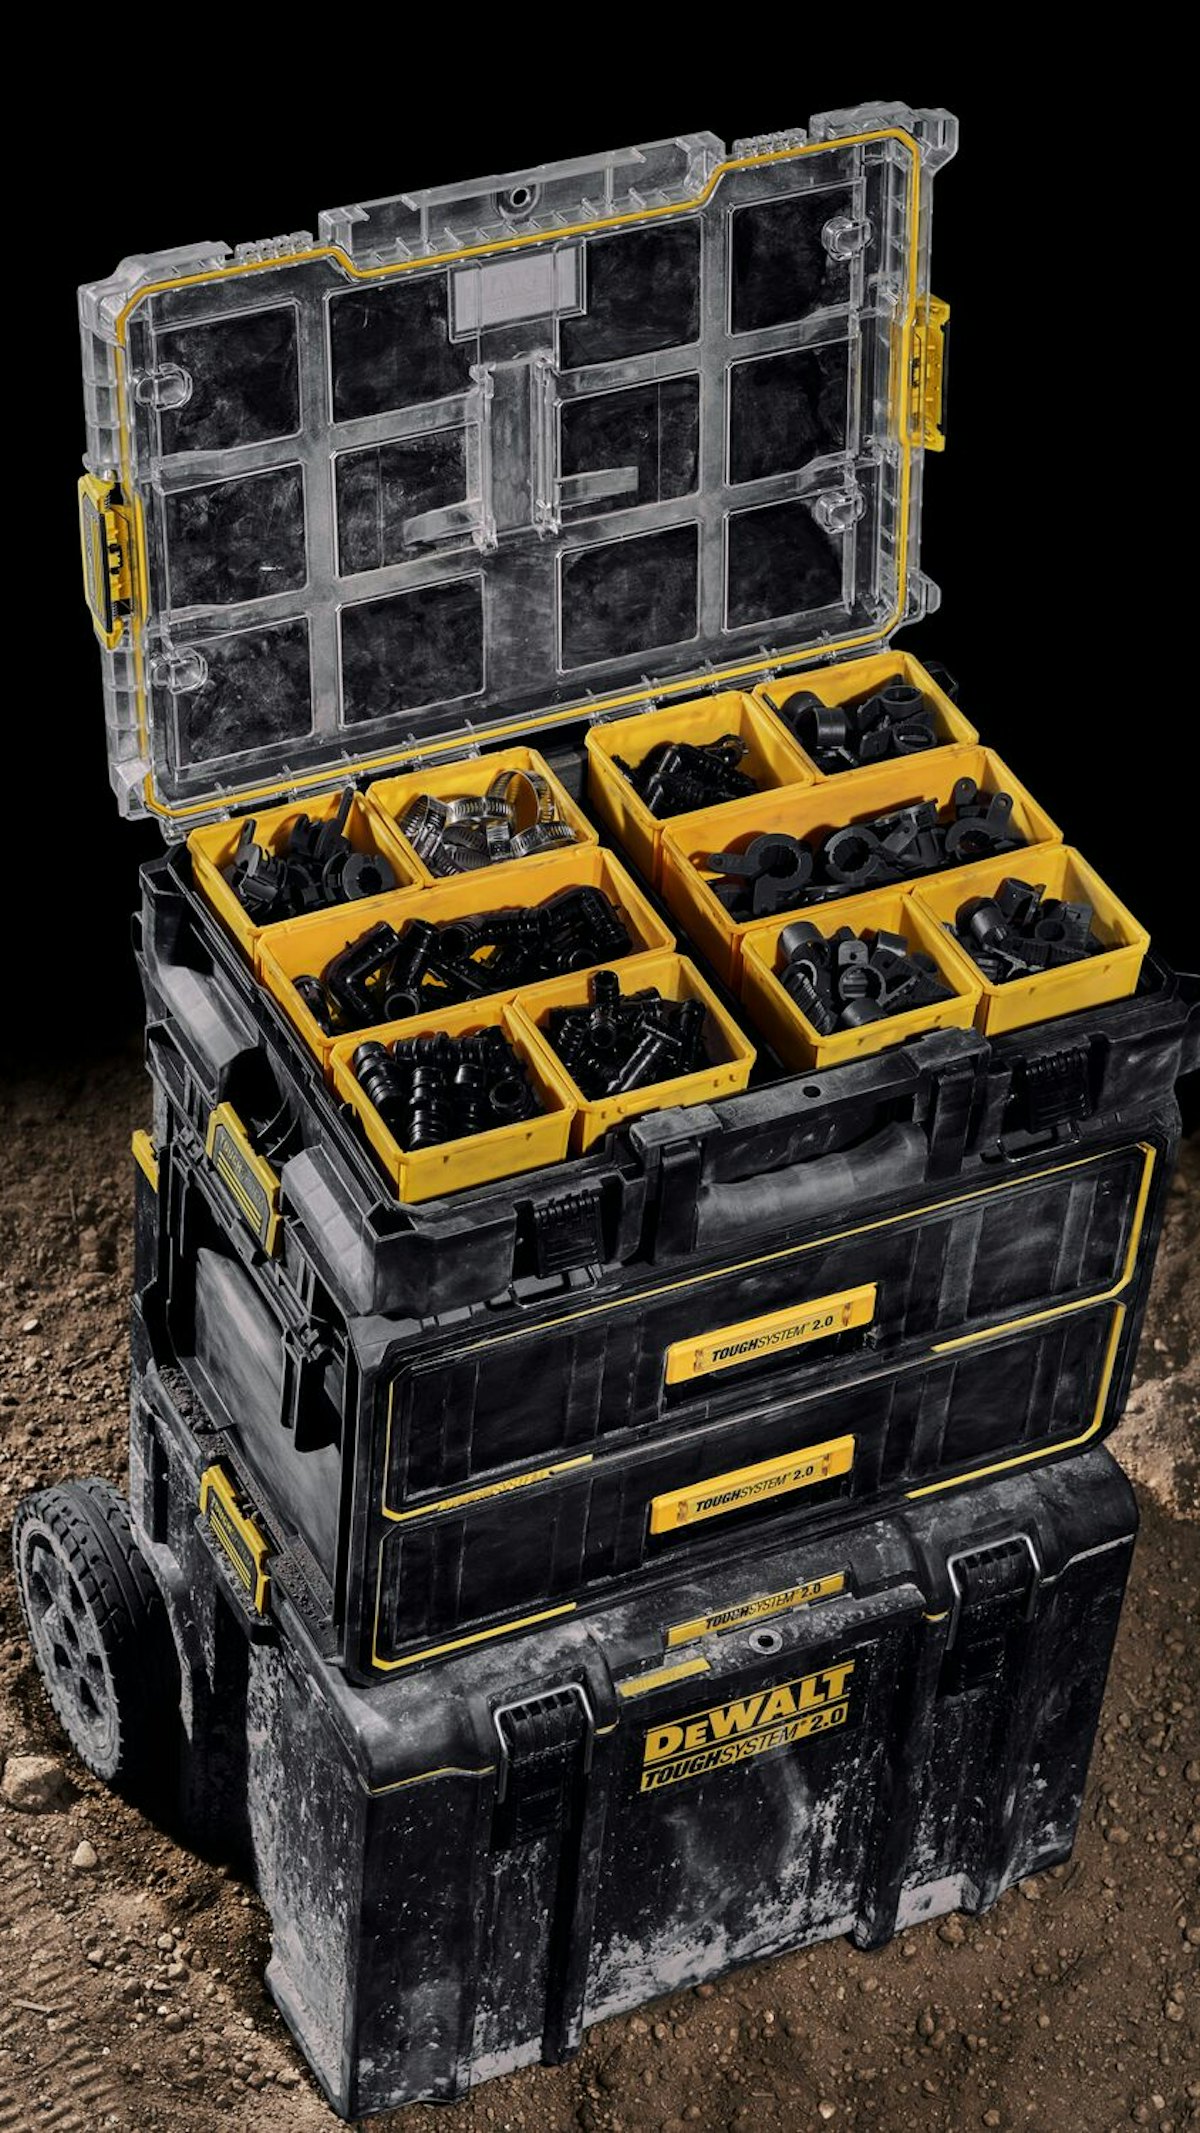 ToughSystem 2.0 Tool Bags and Storage Line From: DEWALT